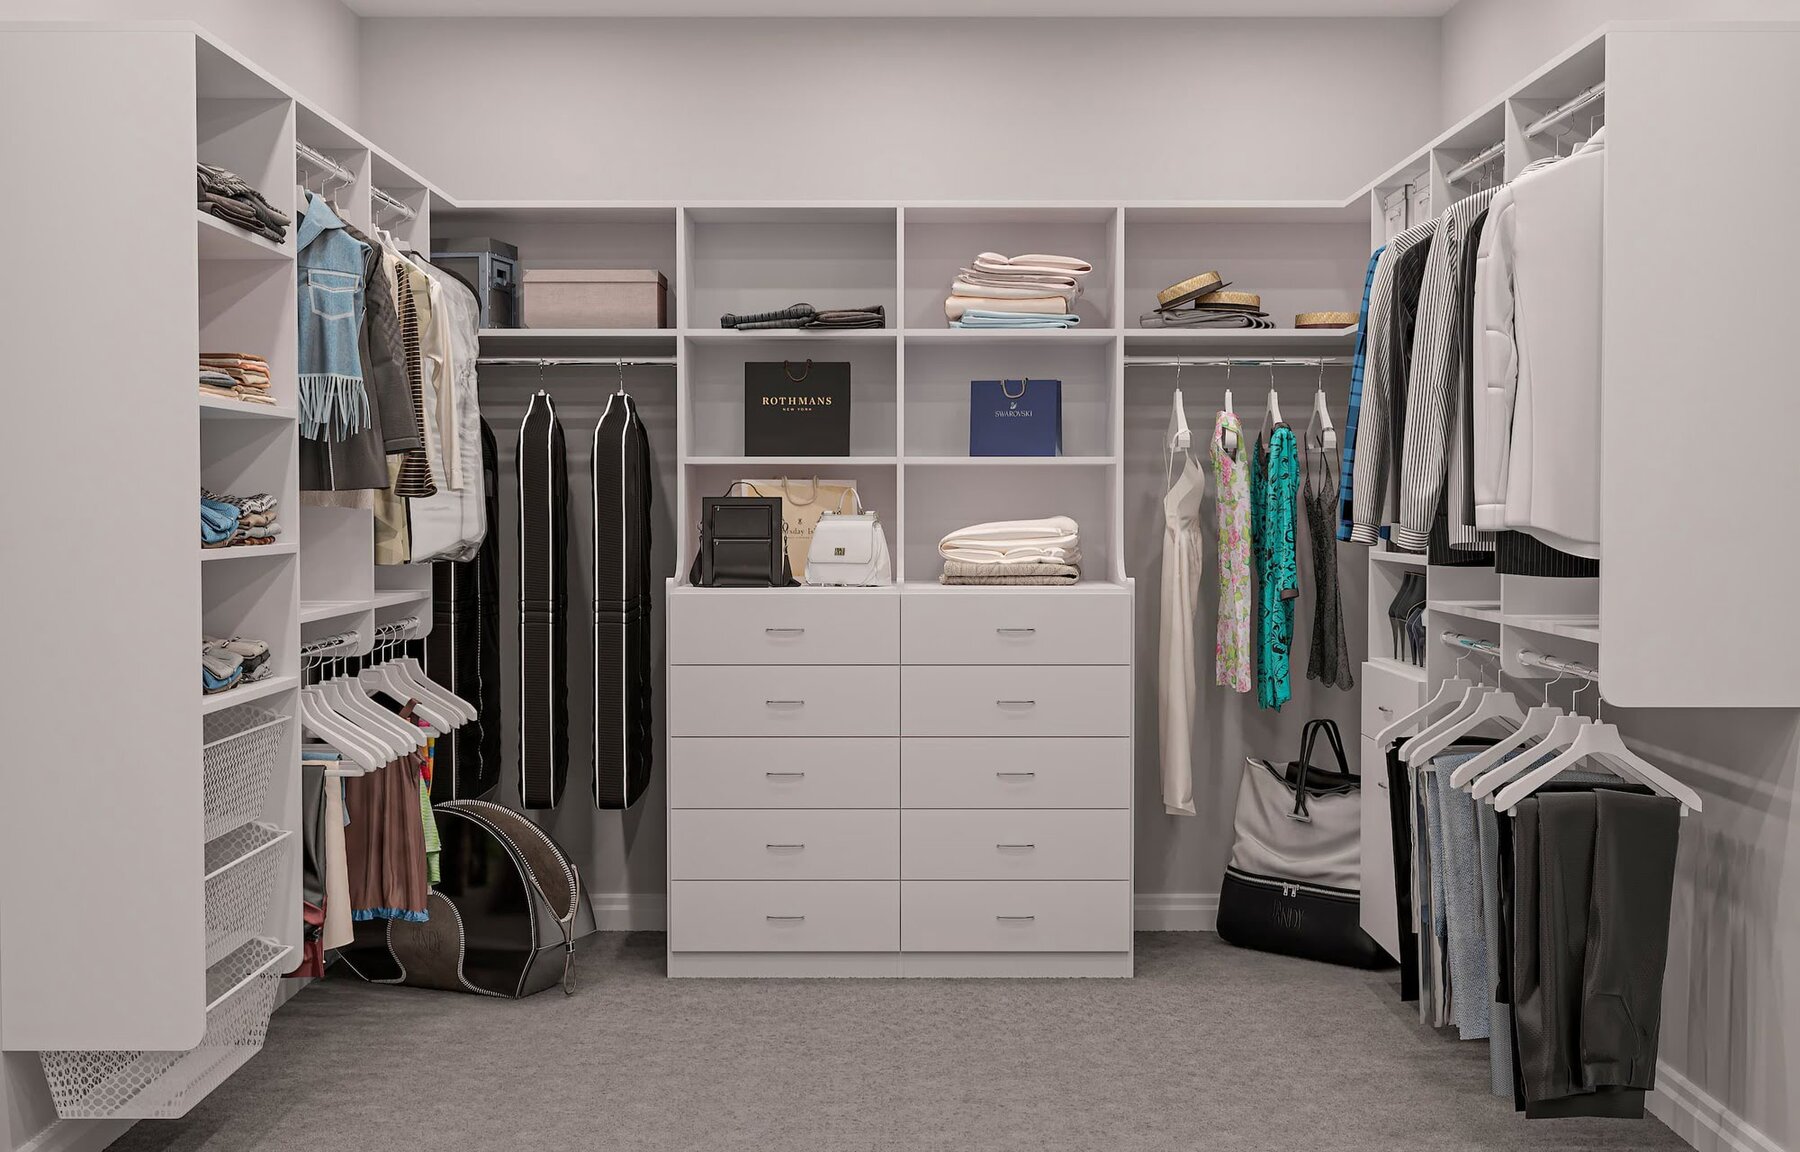 How Much Does It Cost To Do A Walk-in Closet?